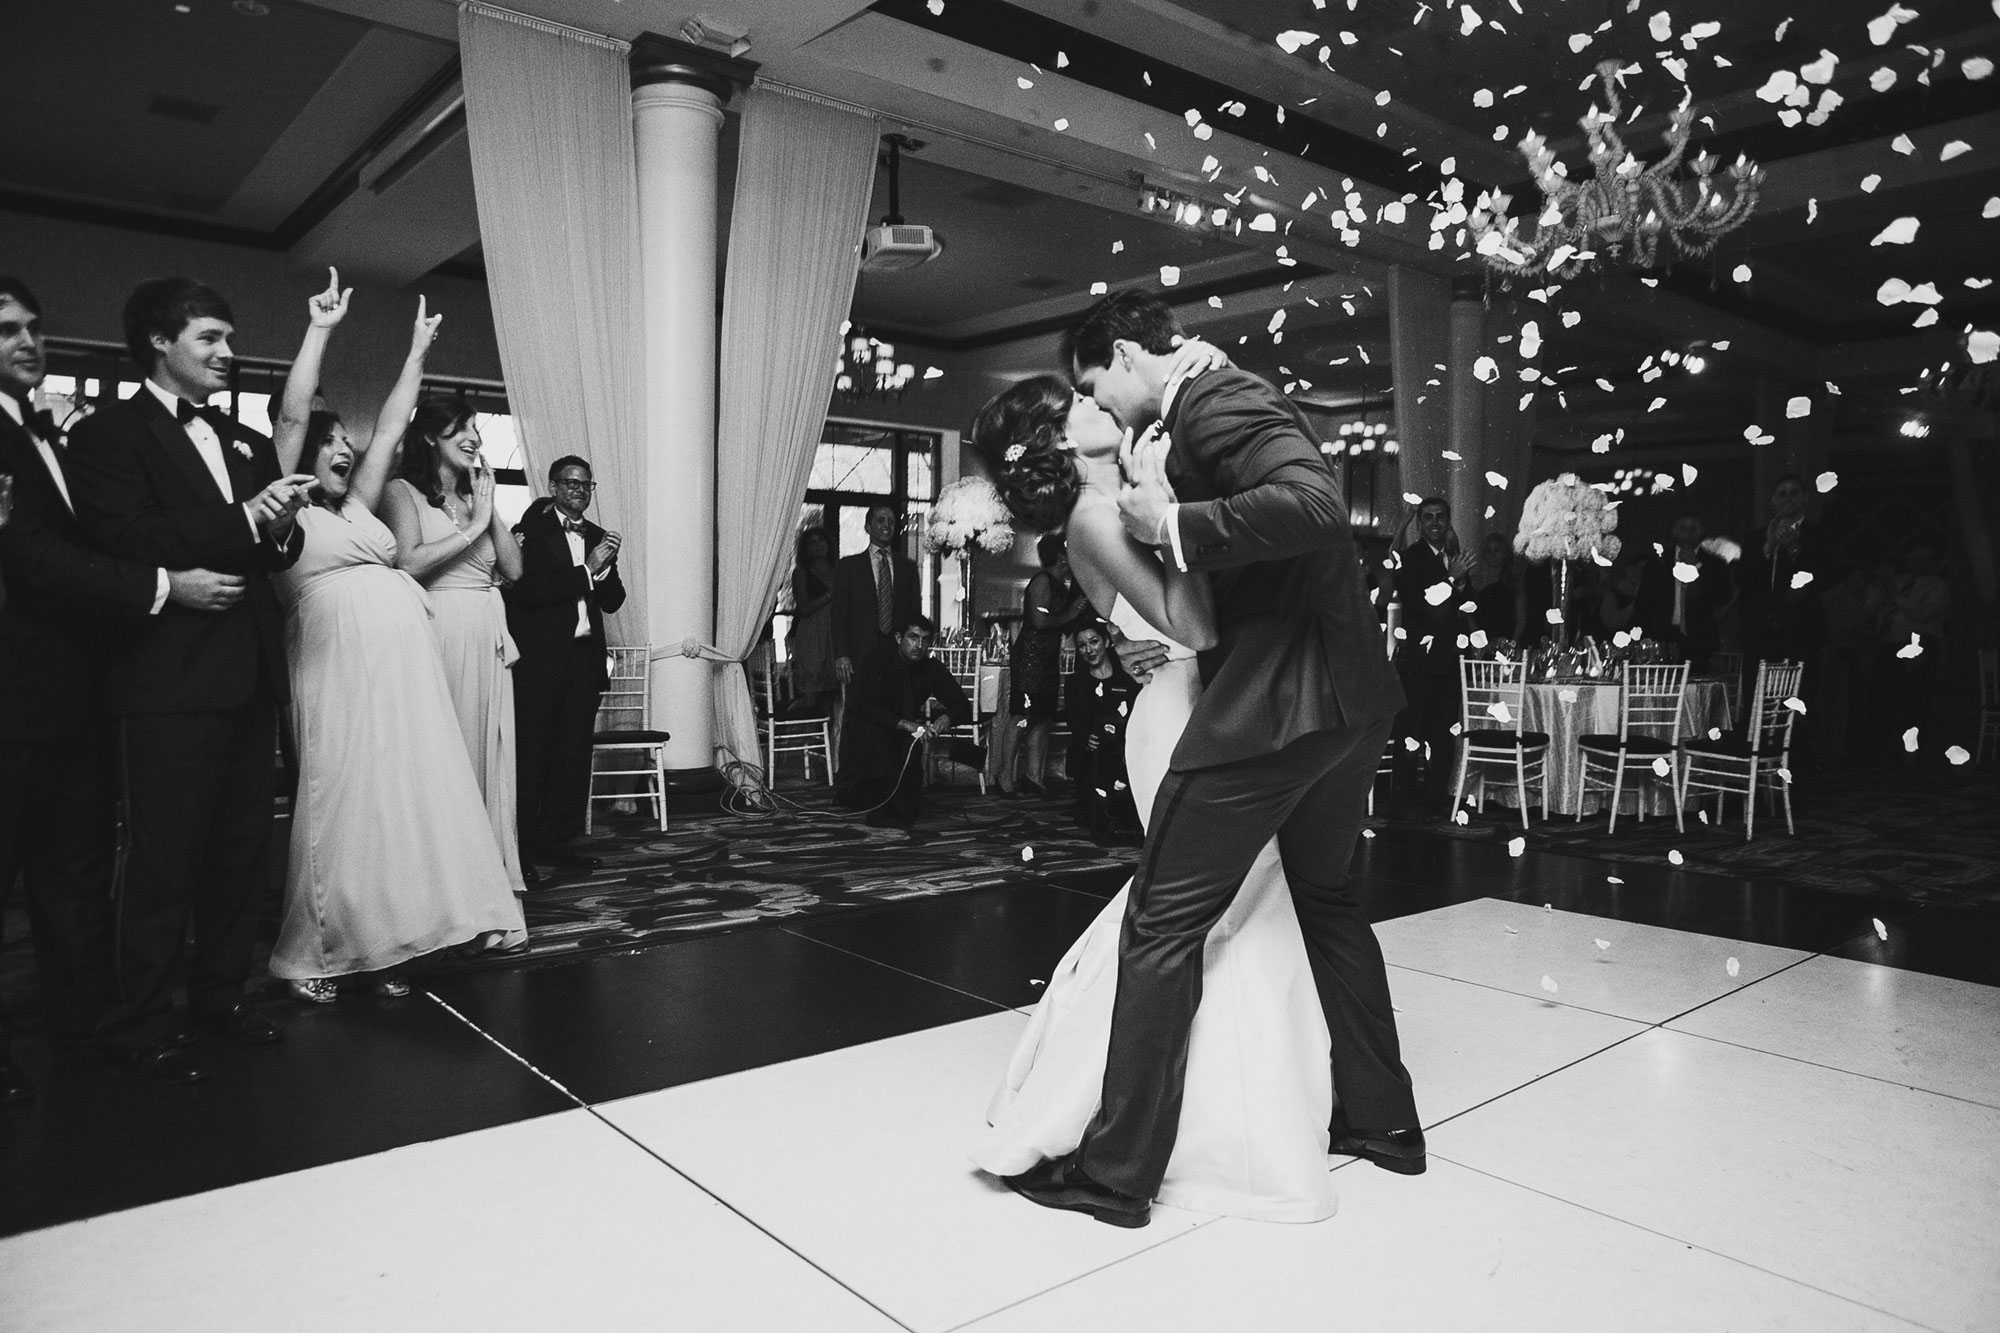 confetti being shot across the dance floor as the couple is announced